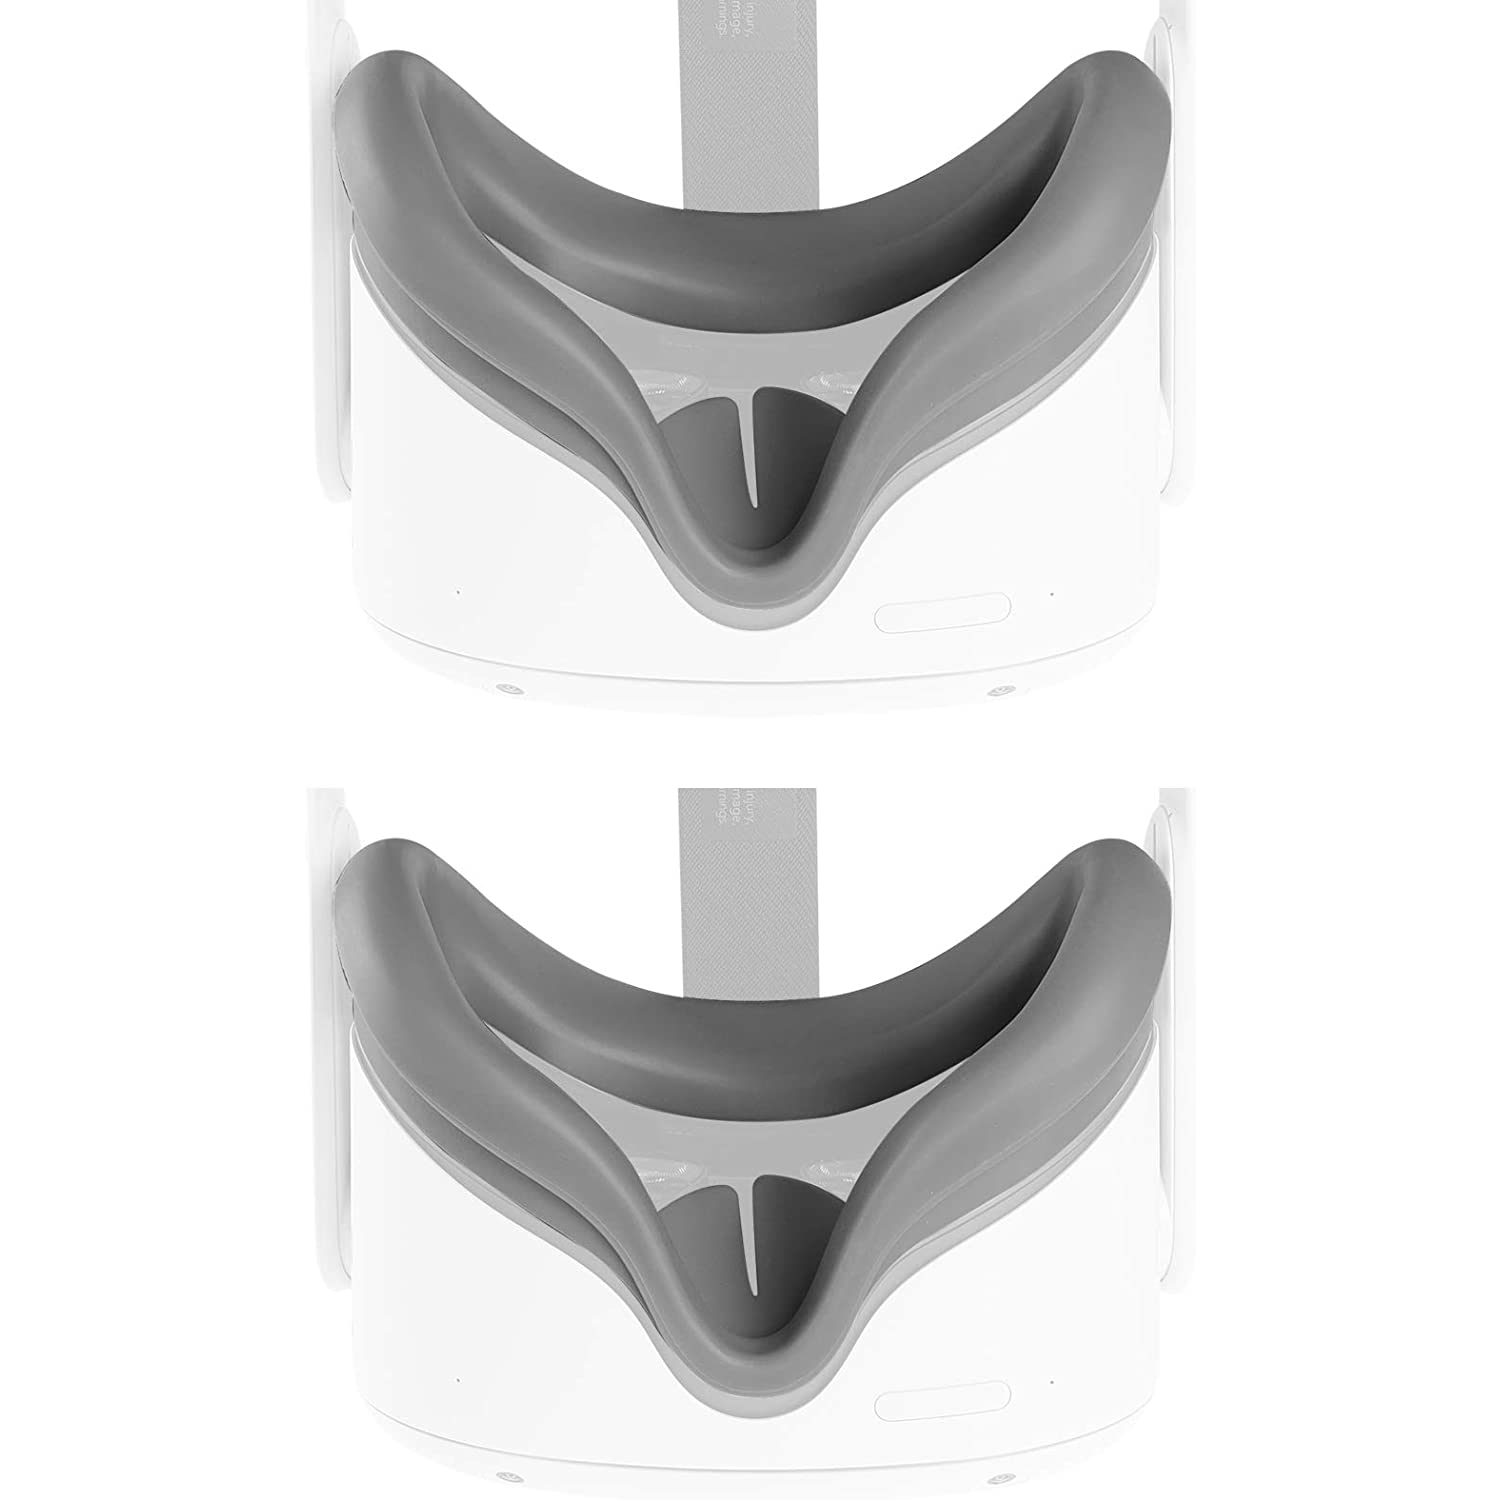 The Bigly Brothers Set of 2 Face Cover works with Oculus Quest 2, Sweat-Proof and Lightproof Silicone VR Cover, Non-Slip and Washable Accessories - Gray